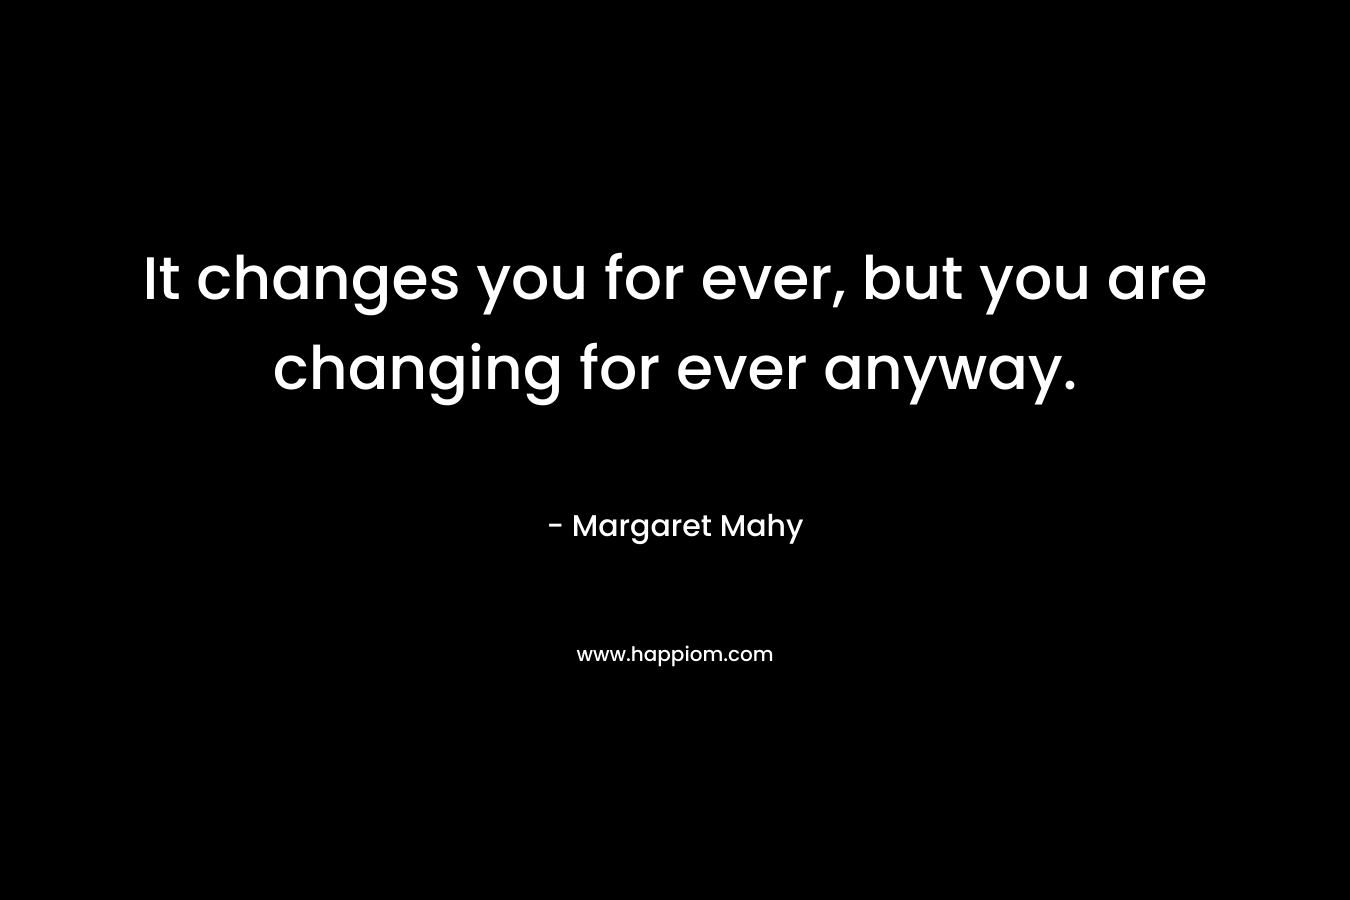 It changes you for ever, but you are changing for ever anyway.